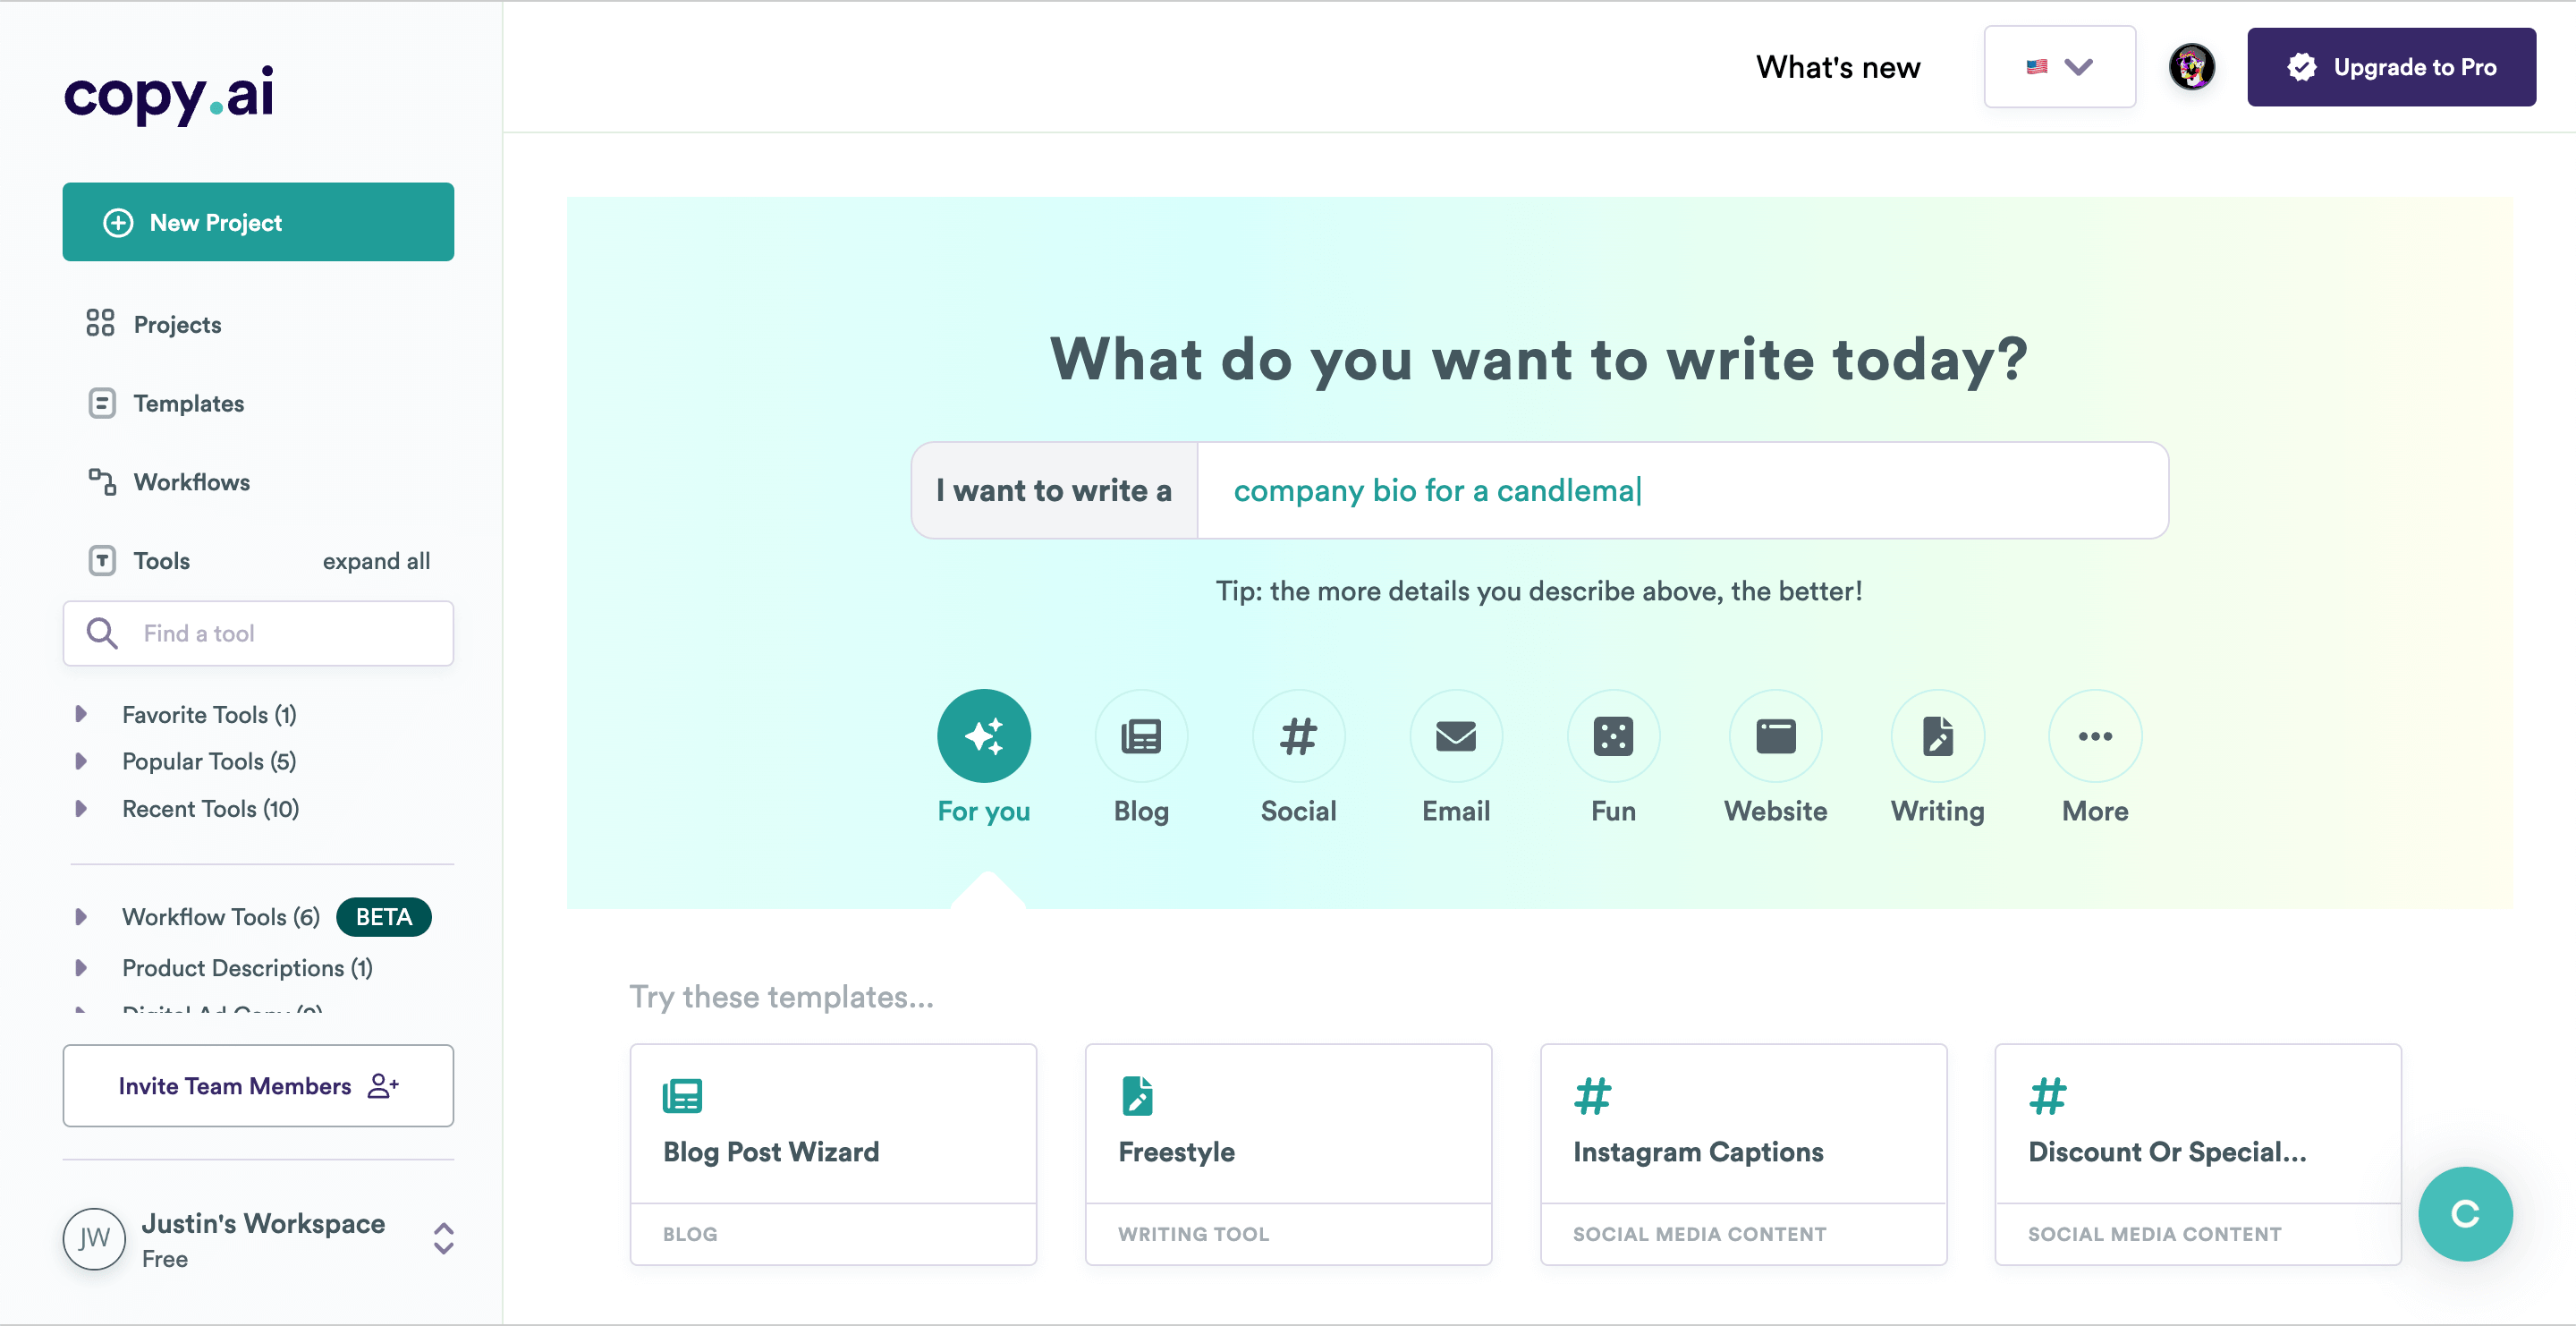 Copy.ai Writing Tool Overview